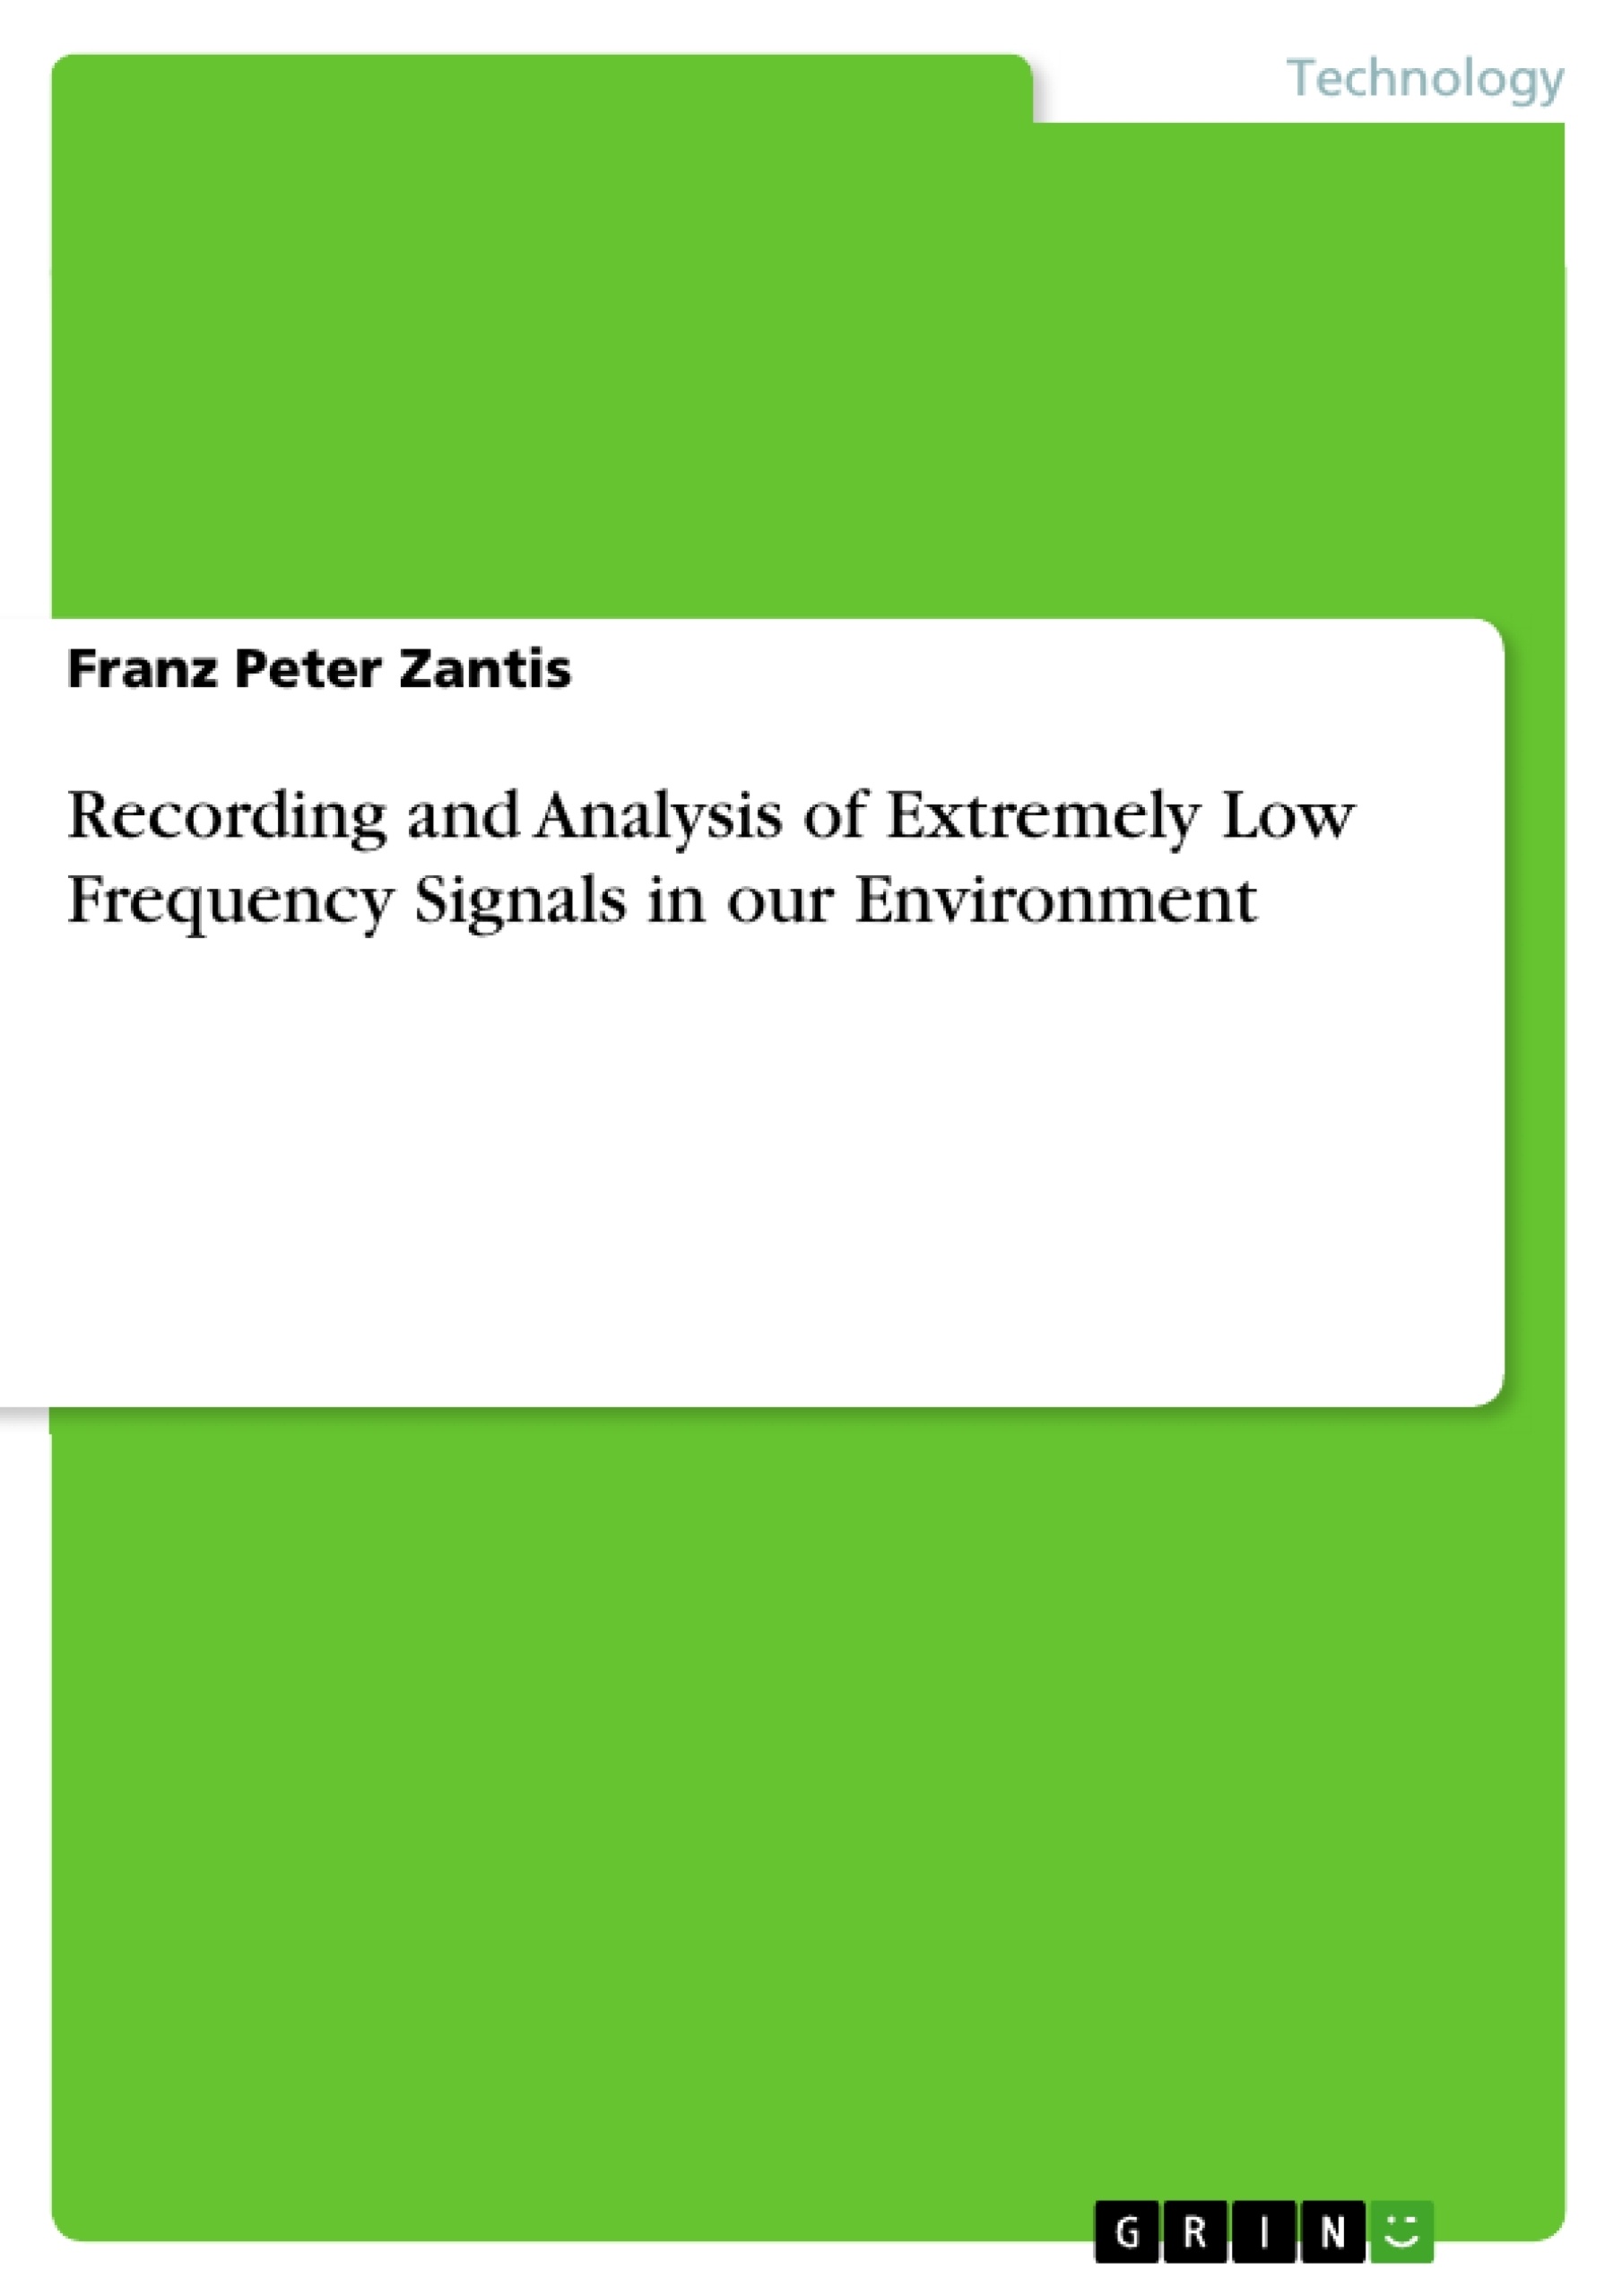 Titre: Recording and Analysis of Extremely Low Frequency Signals in our Environment